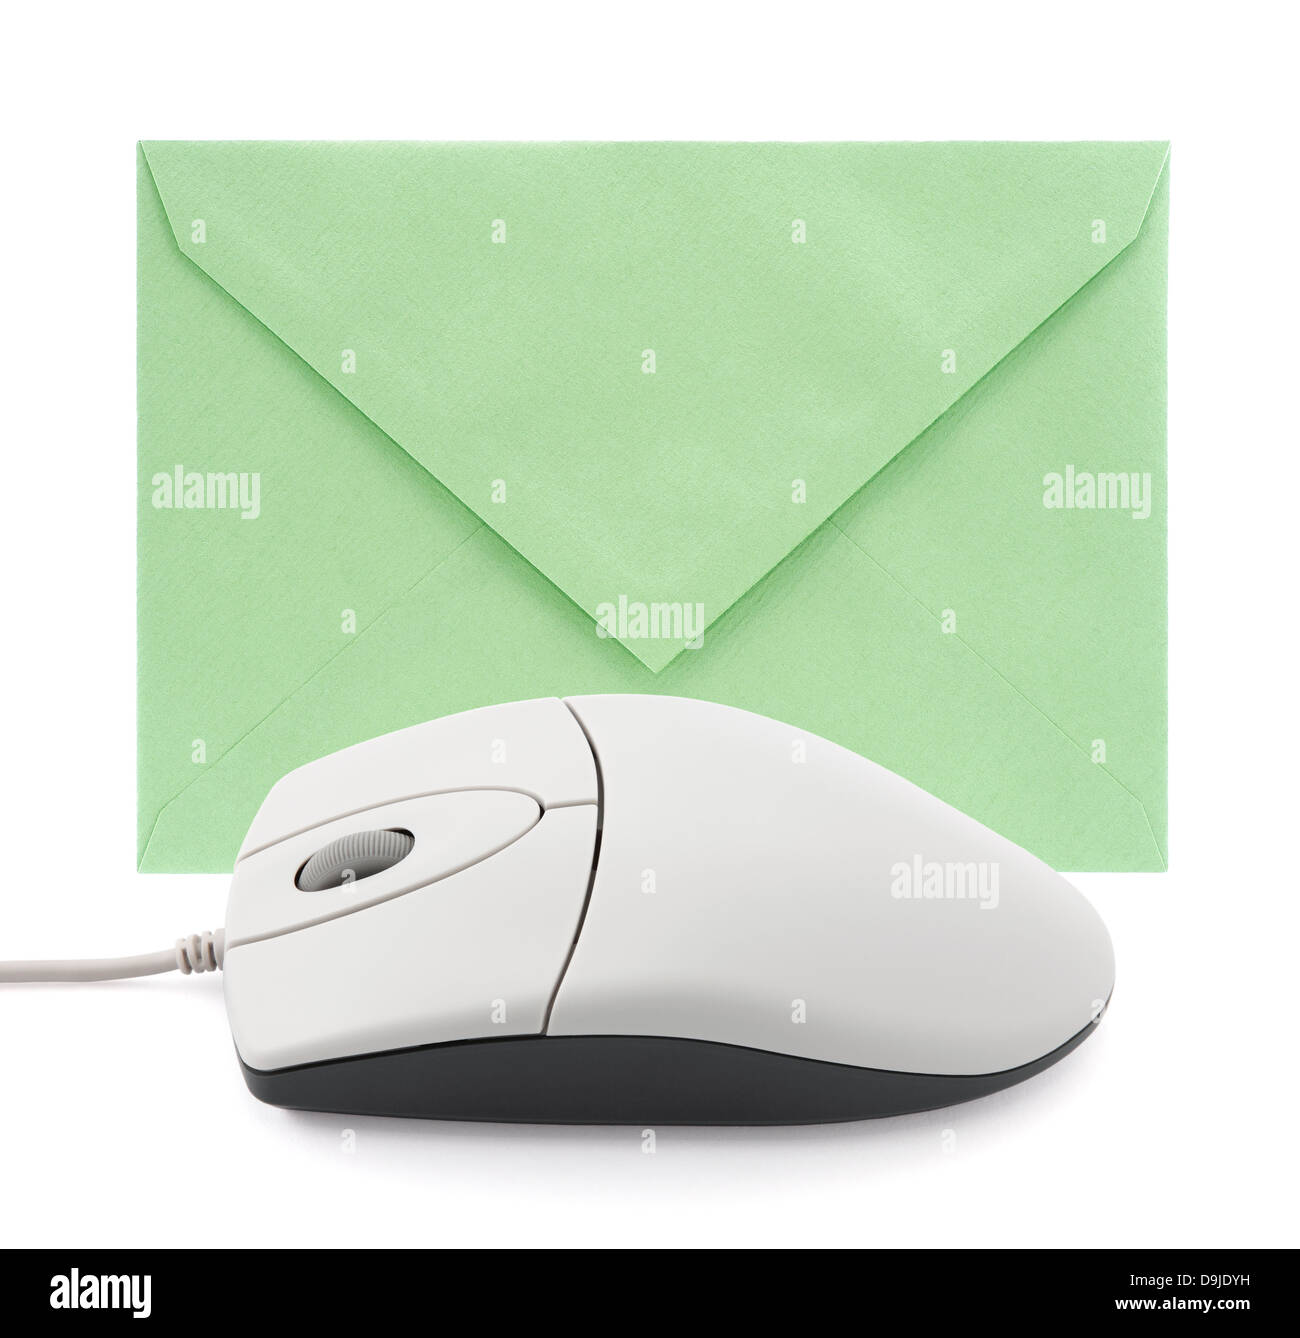 Computer mouse with envelope, concept of email Stock Photo